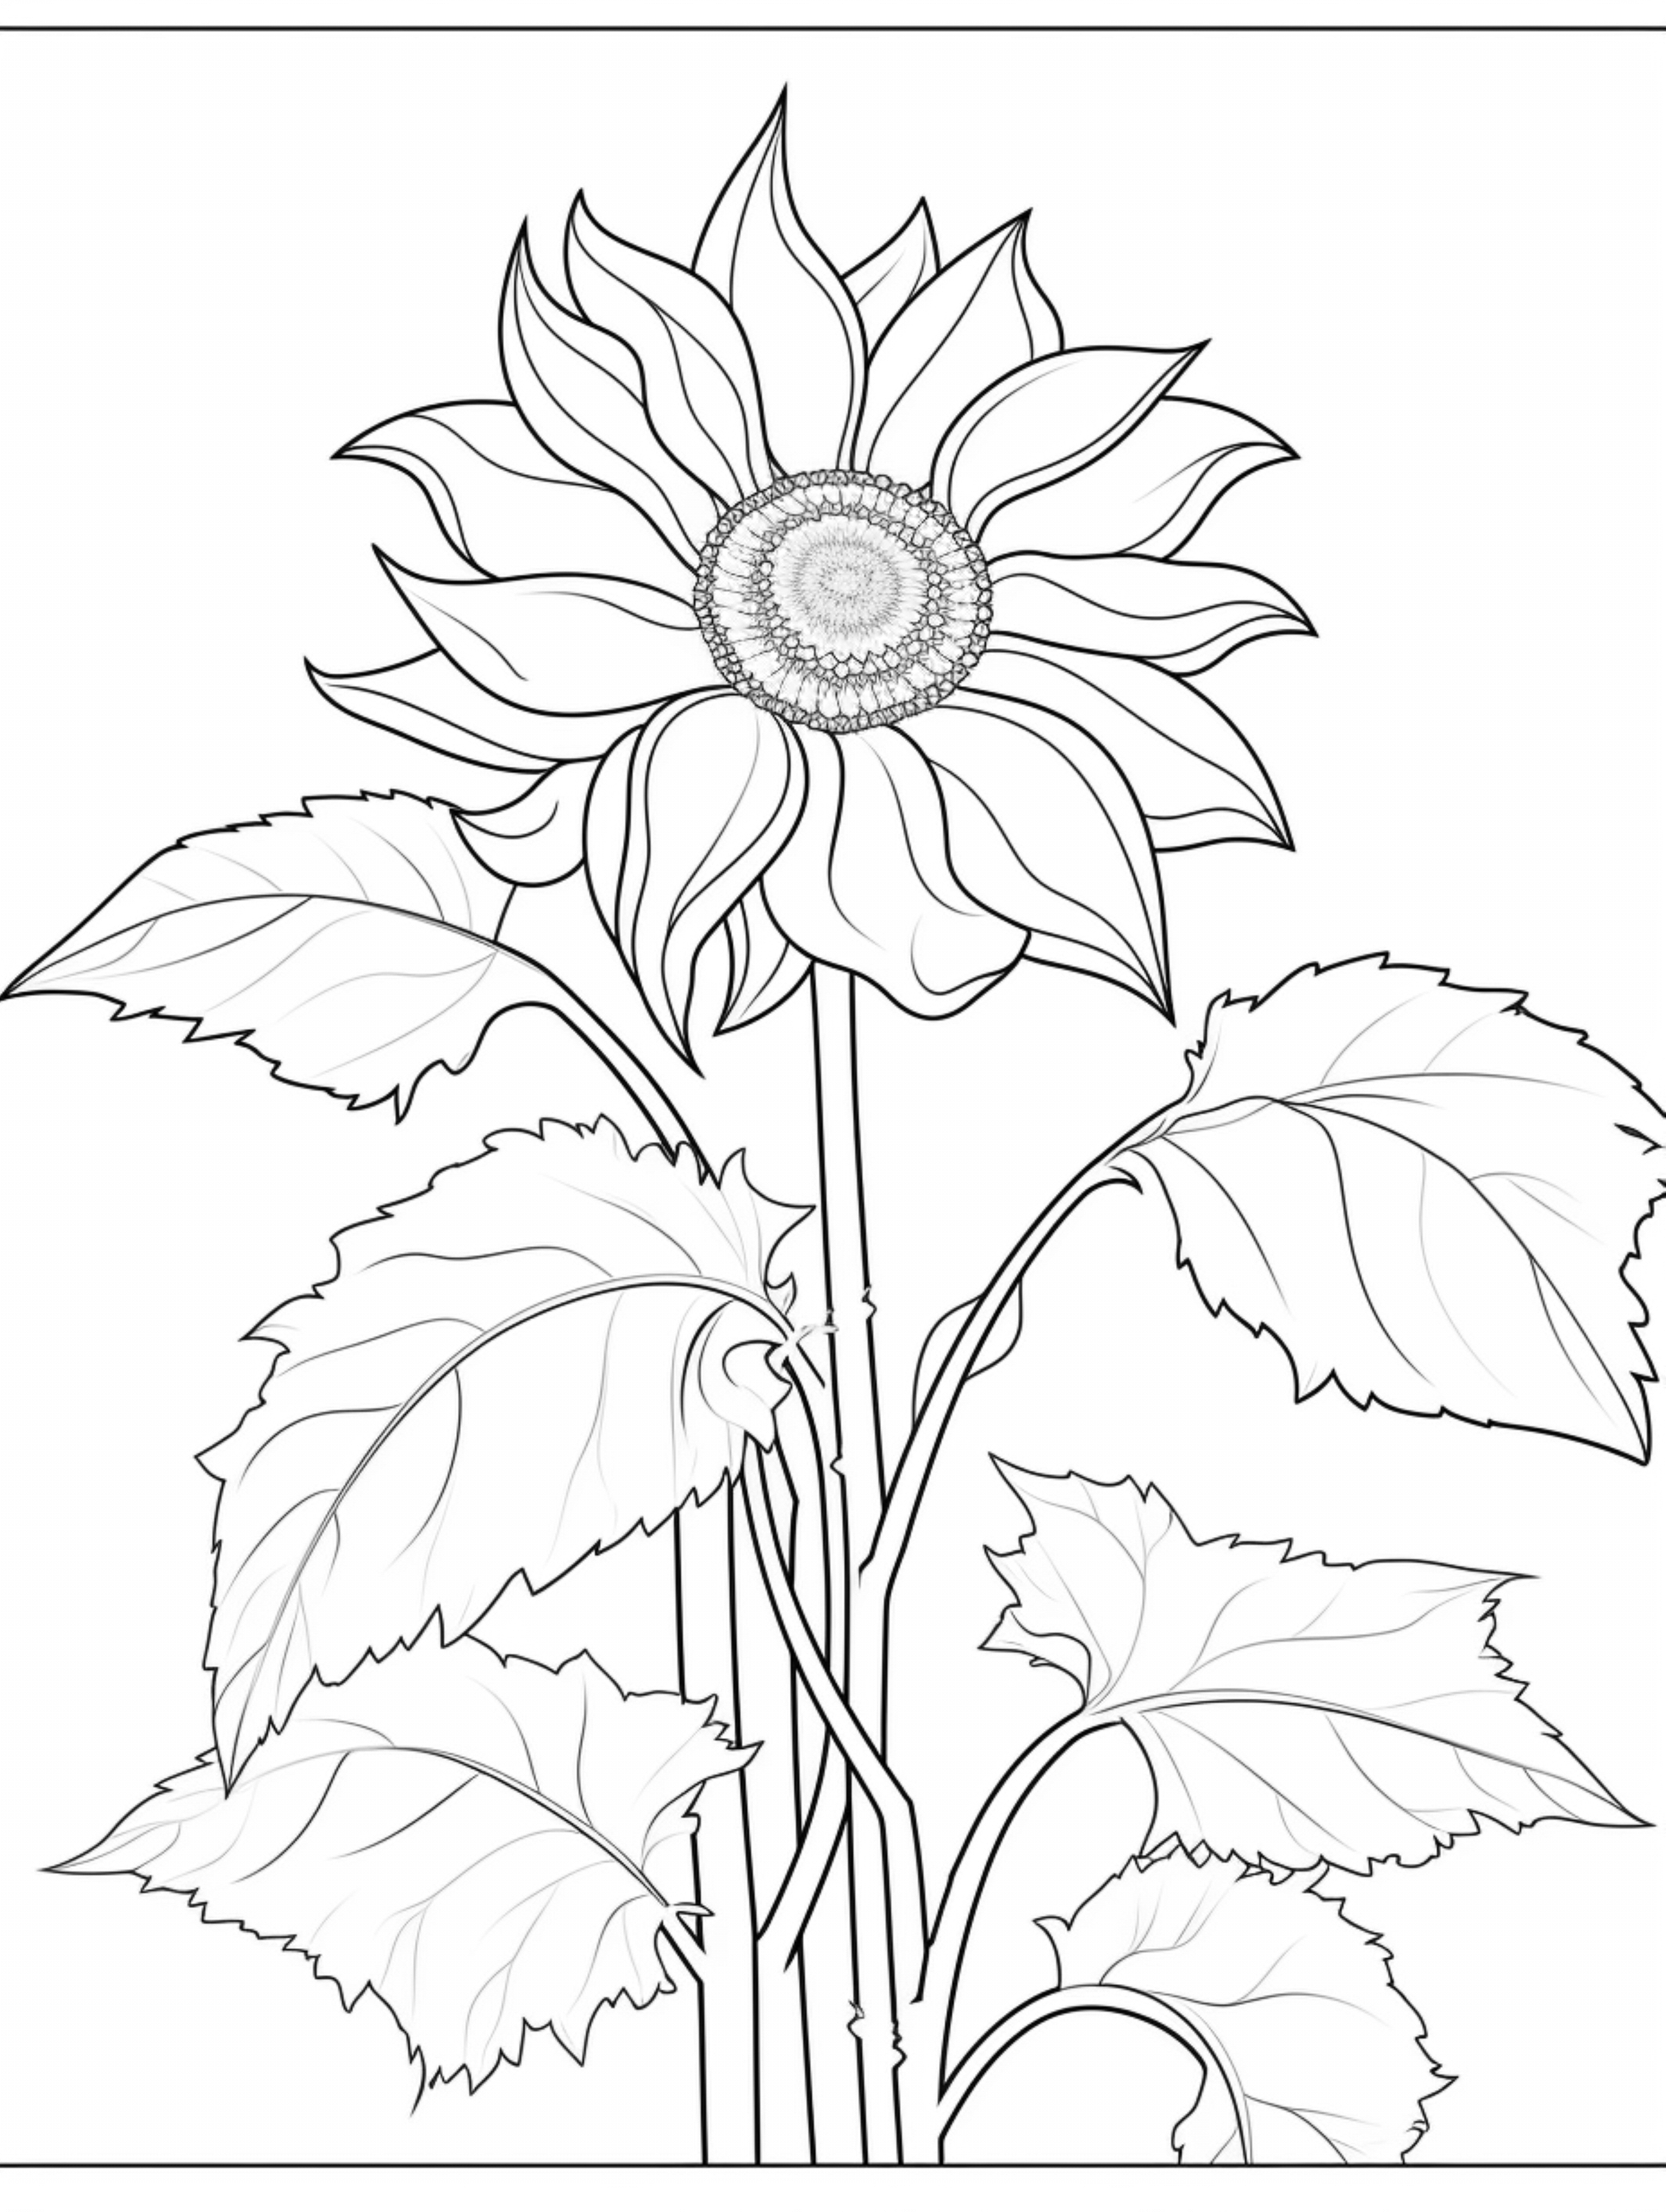 sunflower coloring pages